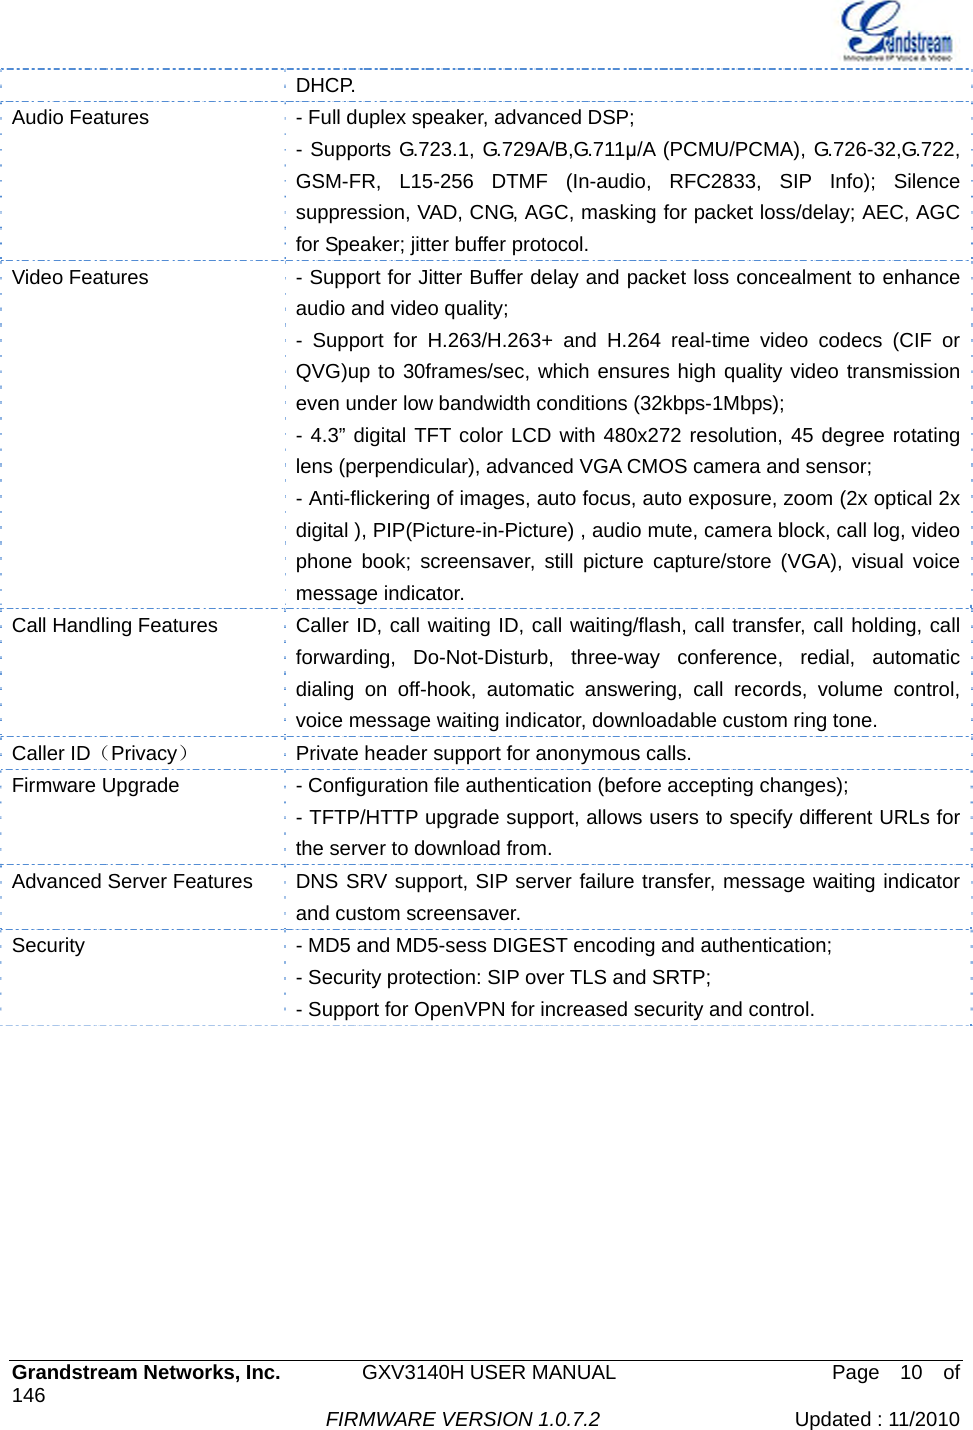   Grandstream Networks, Inc.        GXV3140H USER MANUAL                    Page  10  of 146                                FIRMWARE VERSION 1.0.7.2 Updated : 11/2010  DHCP. Audio Features  - Full duplex speaker, advanced DSP; - Supports G.723.1, G.729A/B,G.711μ/A (PCMU/PCMA), G.726-32,G.722, GSM-FR, L15-256 DTMF (In-audio, RFC2833, SIP Info); Silence suppression, VAD, CNG, AGC, masking for packet loss/delay; AEC, AGC for Speaker; jitter buffer protocol. Video Features  - Support for Jitter Buffer delay and packet loss concealment to enhance audio and video quality; - Support for H.263/H.263+ and H.264 real-time video codecs (CIF or QVG)up to 30frames/sec, which ensures high quality video transmission even under low bandwidth conditions (32kbps-1Mbps); - 4.3” digital TFT color LCD with 480x272 resolution, 45 degree rotating lens (perpendicular), advanced VGA CMOS camera and sensor; - Anti-flickering of images, auto focus, auto exposure, zoom (2x optical 2x digital ), PIP(Picture-in-Picture) , audio mute, camera block, call log, video phone book; screensaver, still picture capture/store (VGA), visual voice message indicator. Call Handling Features  Caller ID, call waiting ID, call waiting/flash, call transfer, call holding, call forwarding, Do-Not-Disturb, three-way conference, redial, automatic dialing on off-hook, automatic answering, call records, volume control, voice message waiting indicator, downloadable custom ring tone. Caller ID（Privacy） Private header support for anonymous calls. Firmware Upgrade  - Configuration file authentication (before accepting changes); - TFTP/HTTP upgrade support, allows users to specify different URLs for the server to download from.   Advanced Server Features  DNS SRV support, SIP server failure transfer, message waiting indicator and custom screensaver.   Security  - MD5 and MD5-sess DIGEST encoding and authentication; - Security protection: SIP over TLS and SRTP; - Support for OpenVPN for increased security and control. 